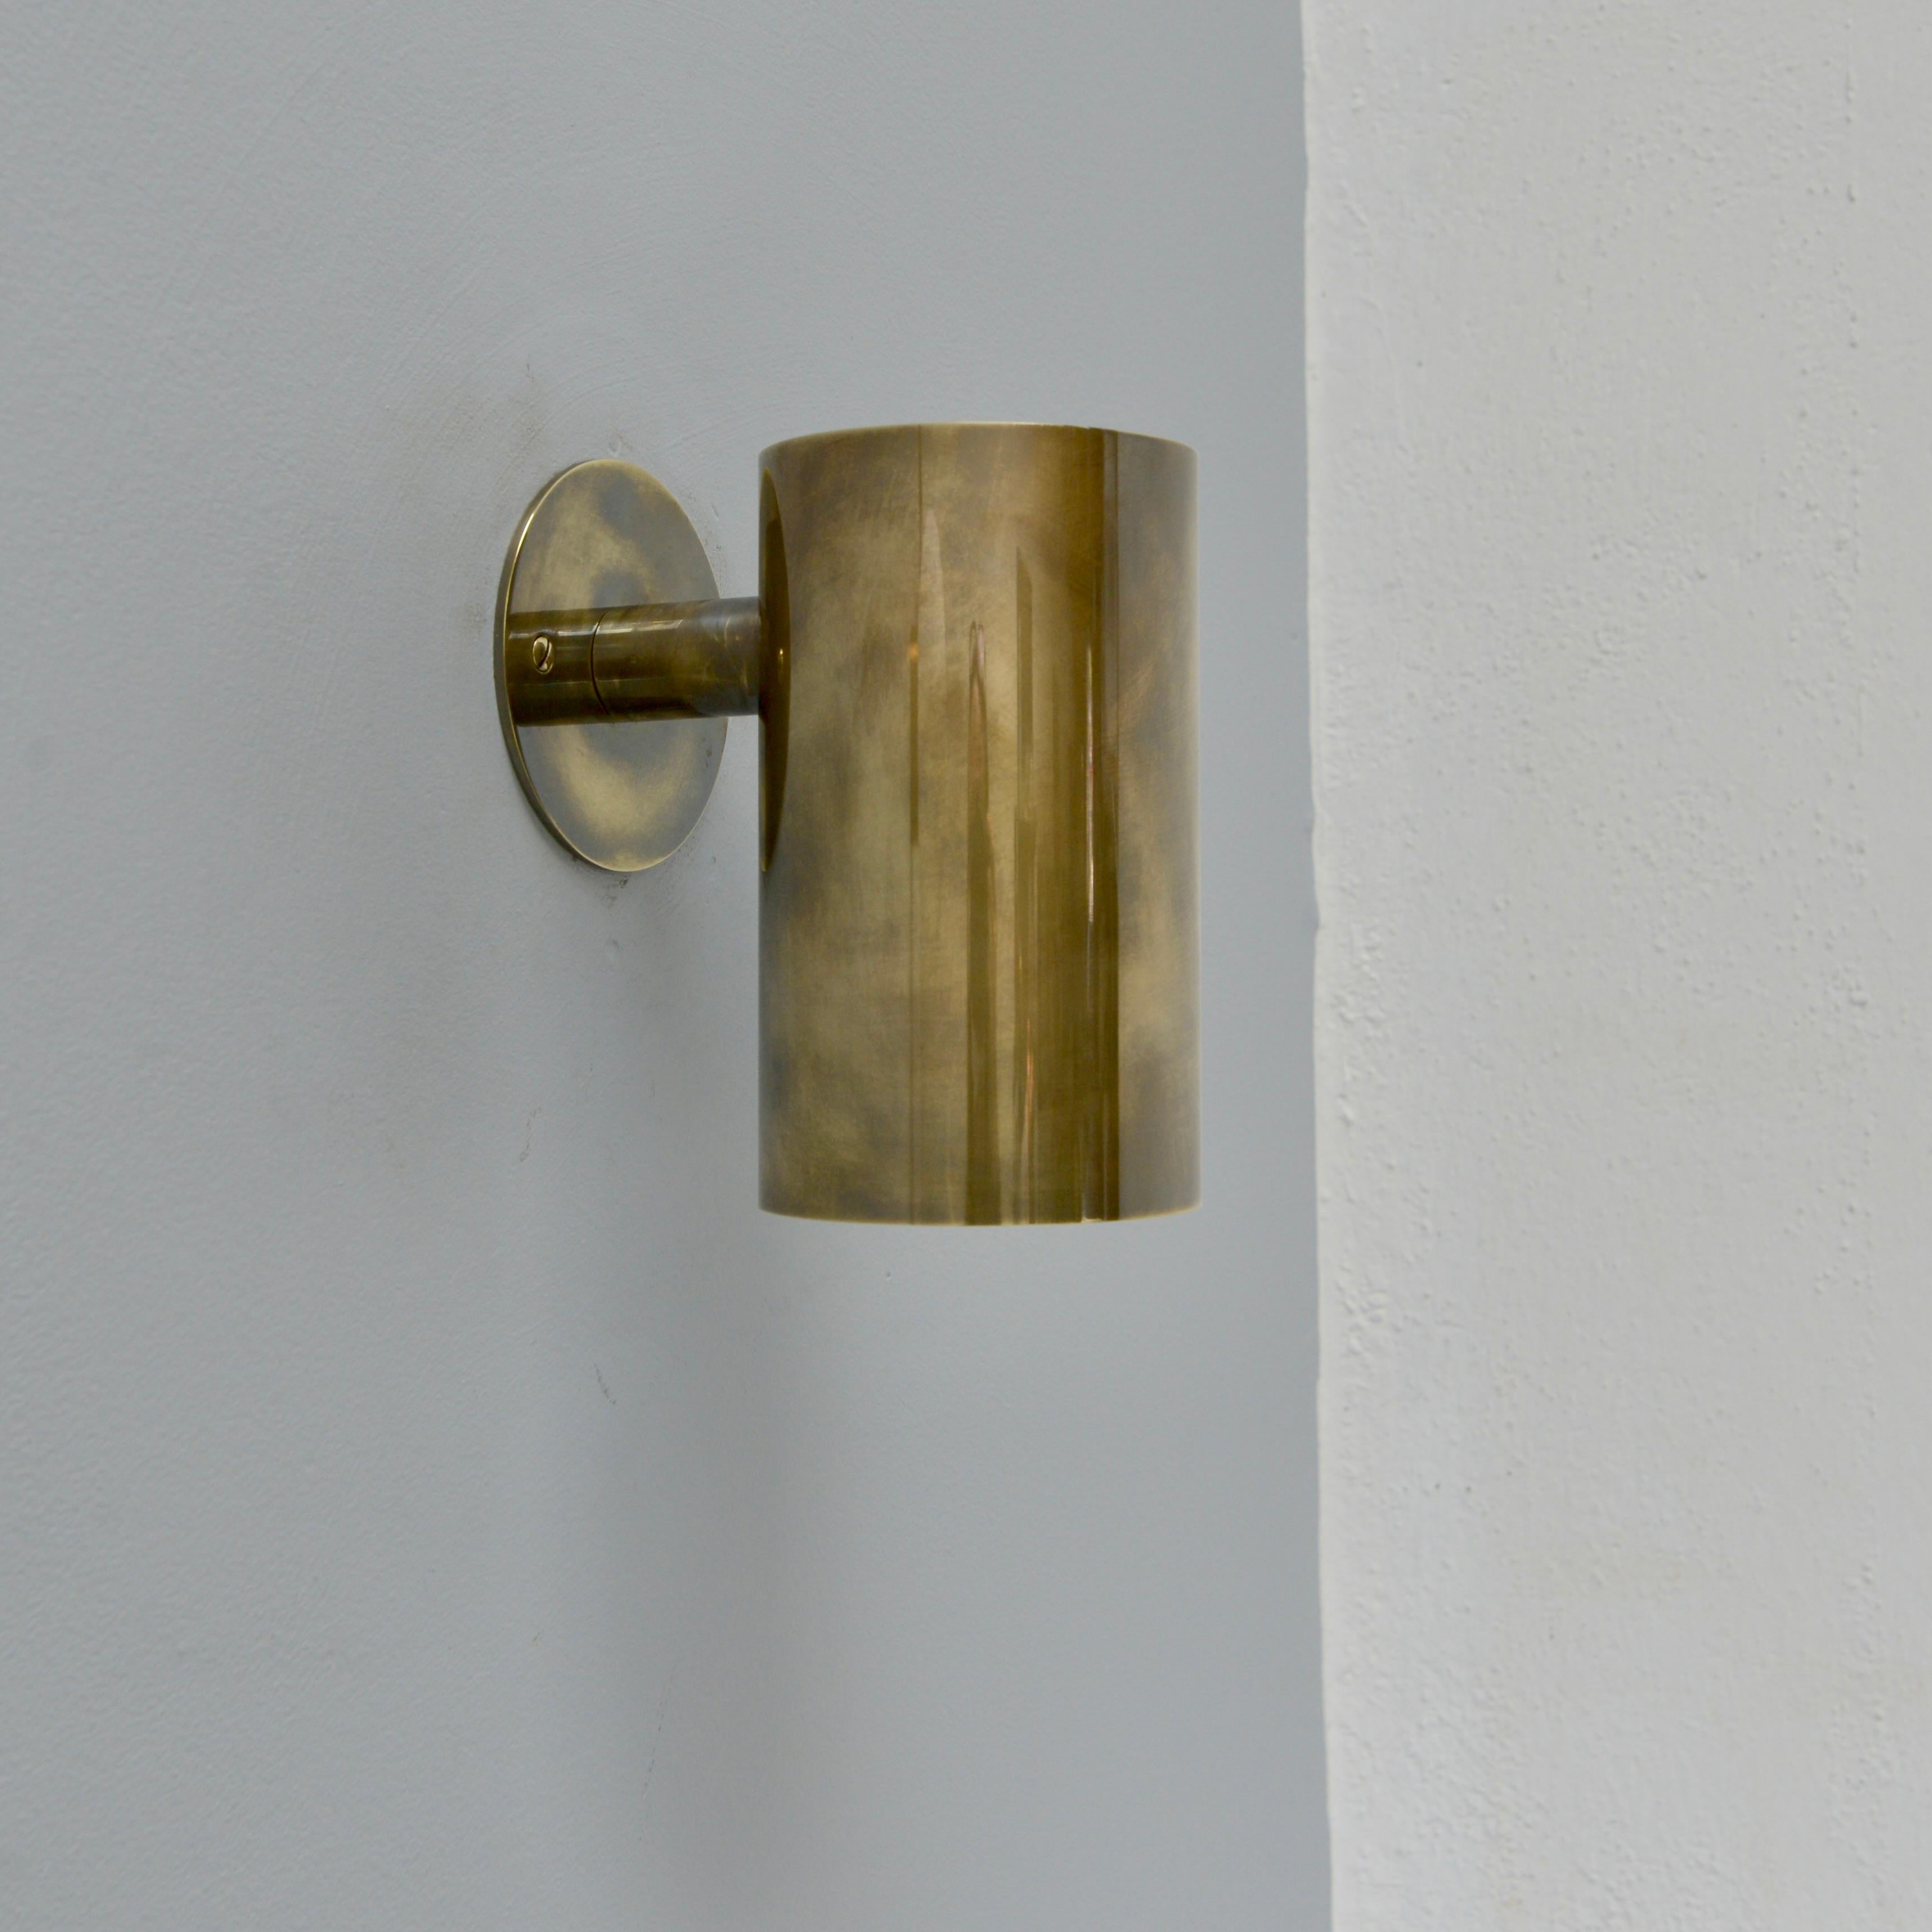 The stunning Lute OD Out/Indoor Sconce by Lumfardo Luminaires is a pure brass cylindrical wall sconce in a patinated un-lacquered brass finish. An all brass fixture, with illumination emitting from the bottom of the cylinder, this sconce is made in